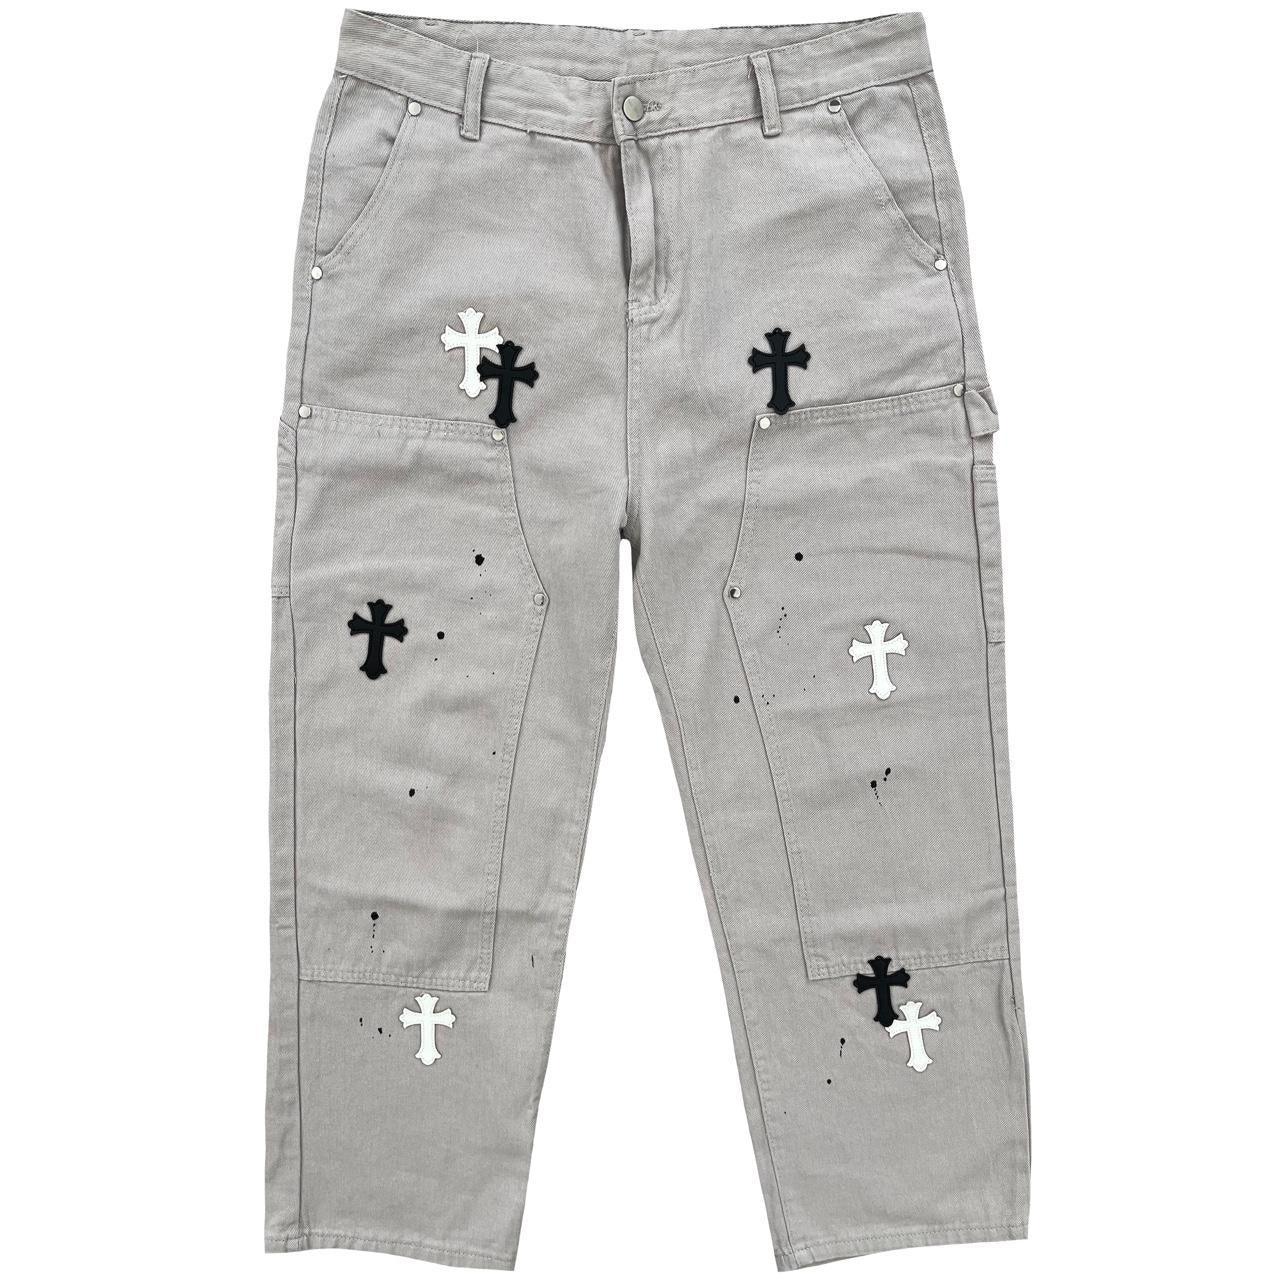 Cross Patch Carpenter Jeans - Known Source